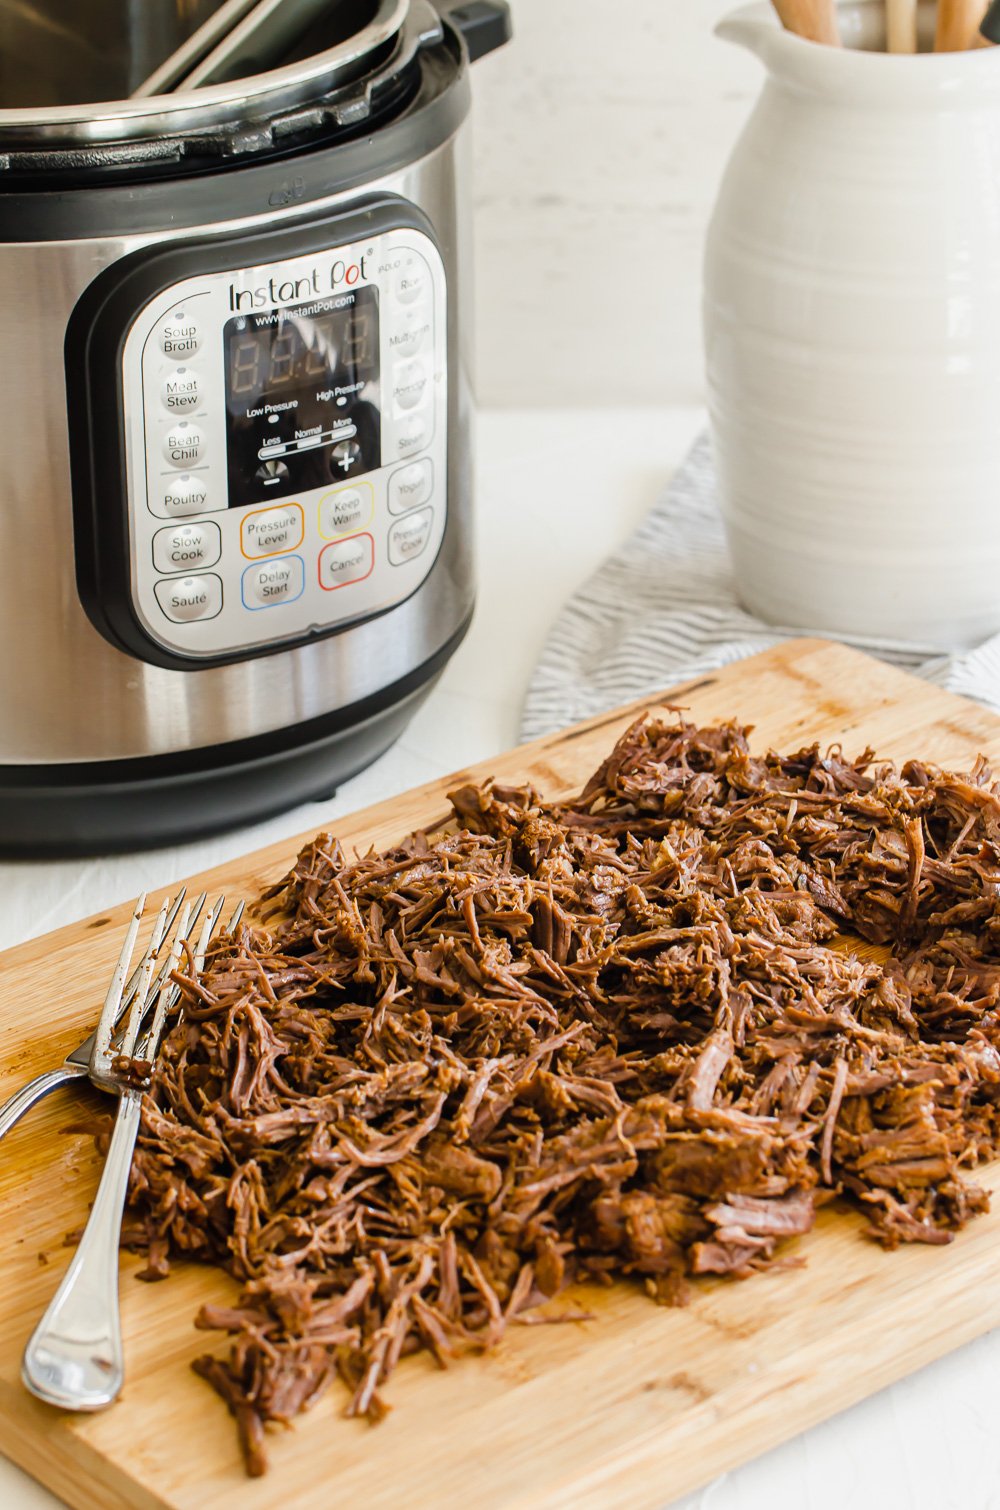 Shredded beef on a wooden cutting board with an Instant Pot in the background.